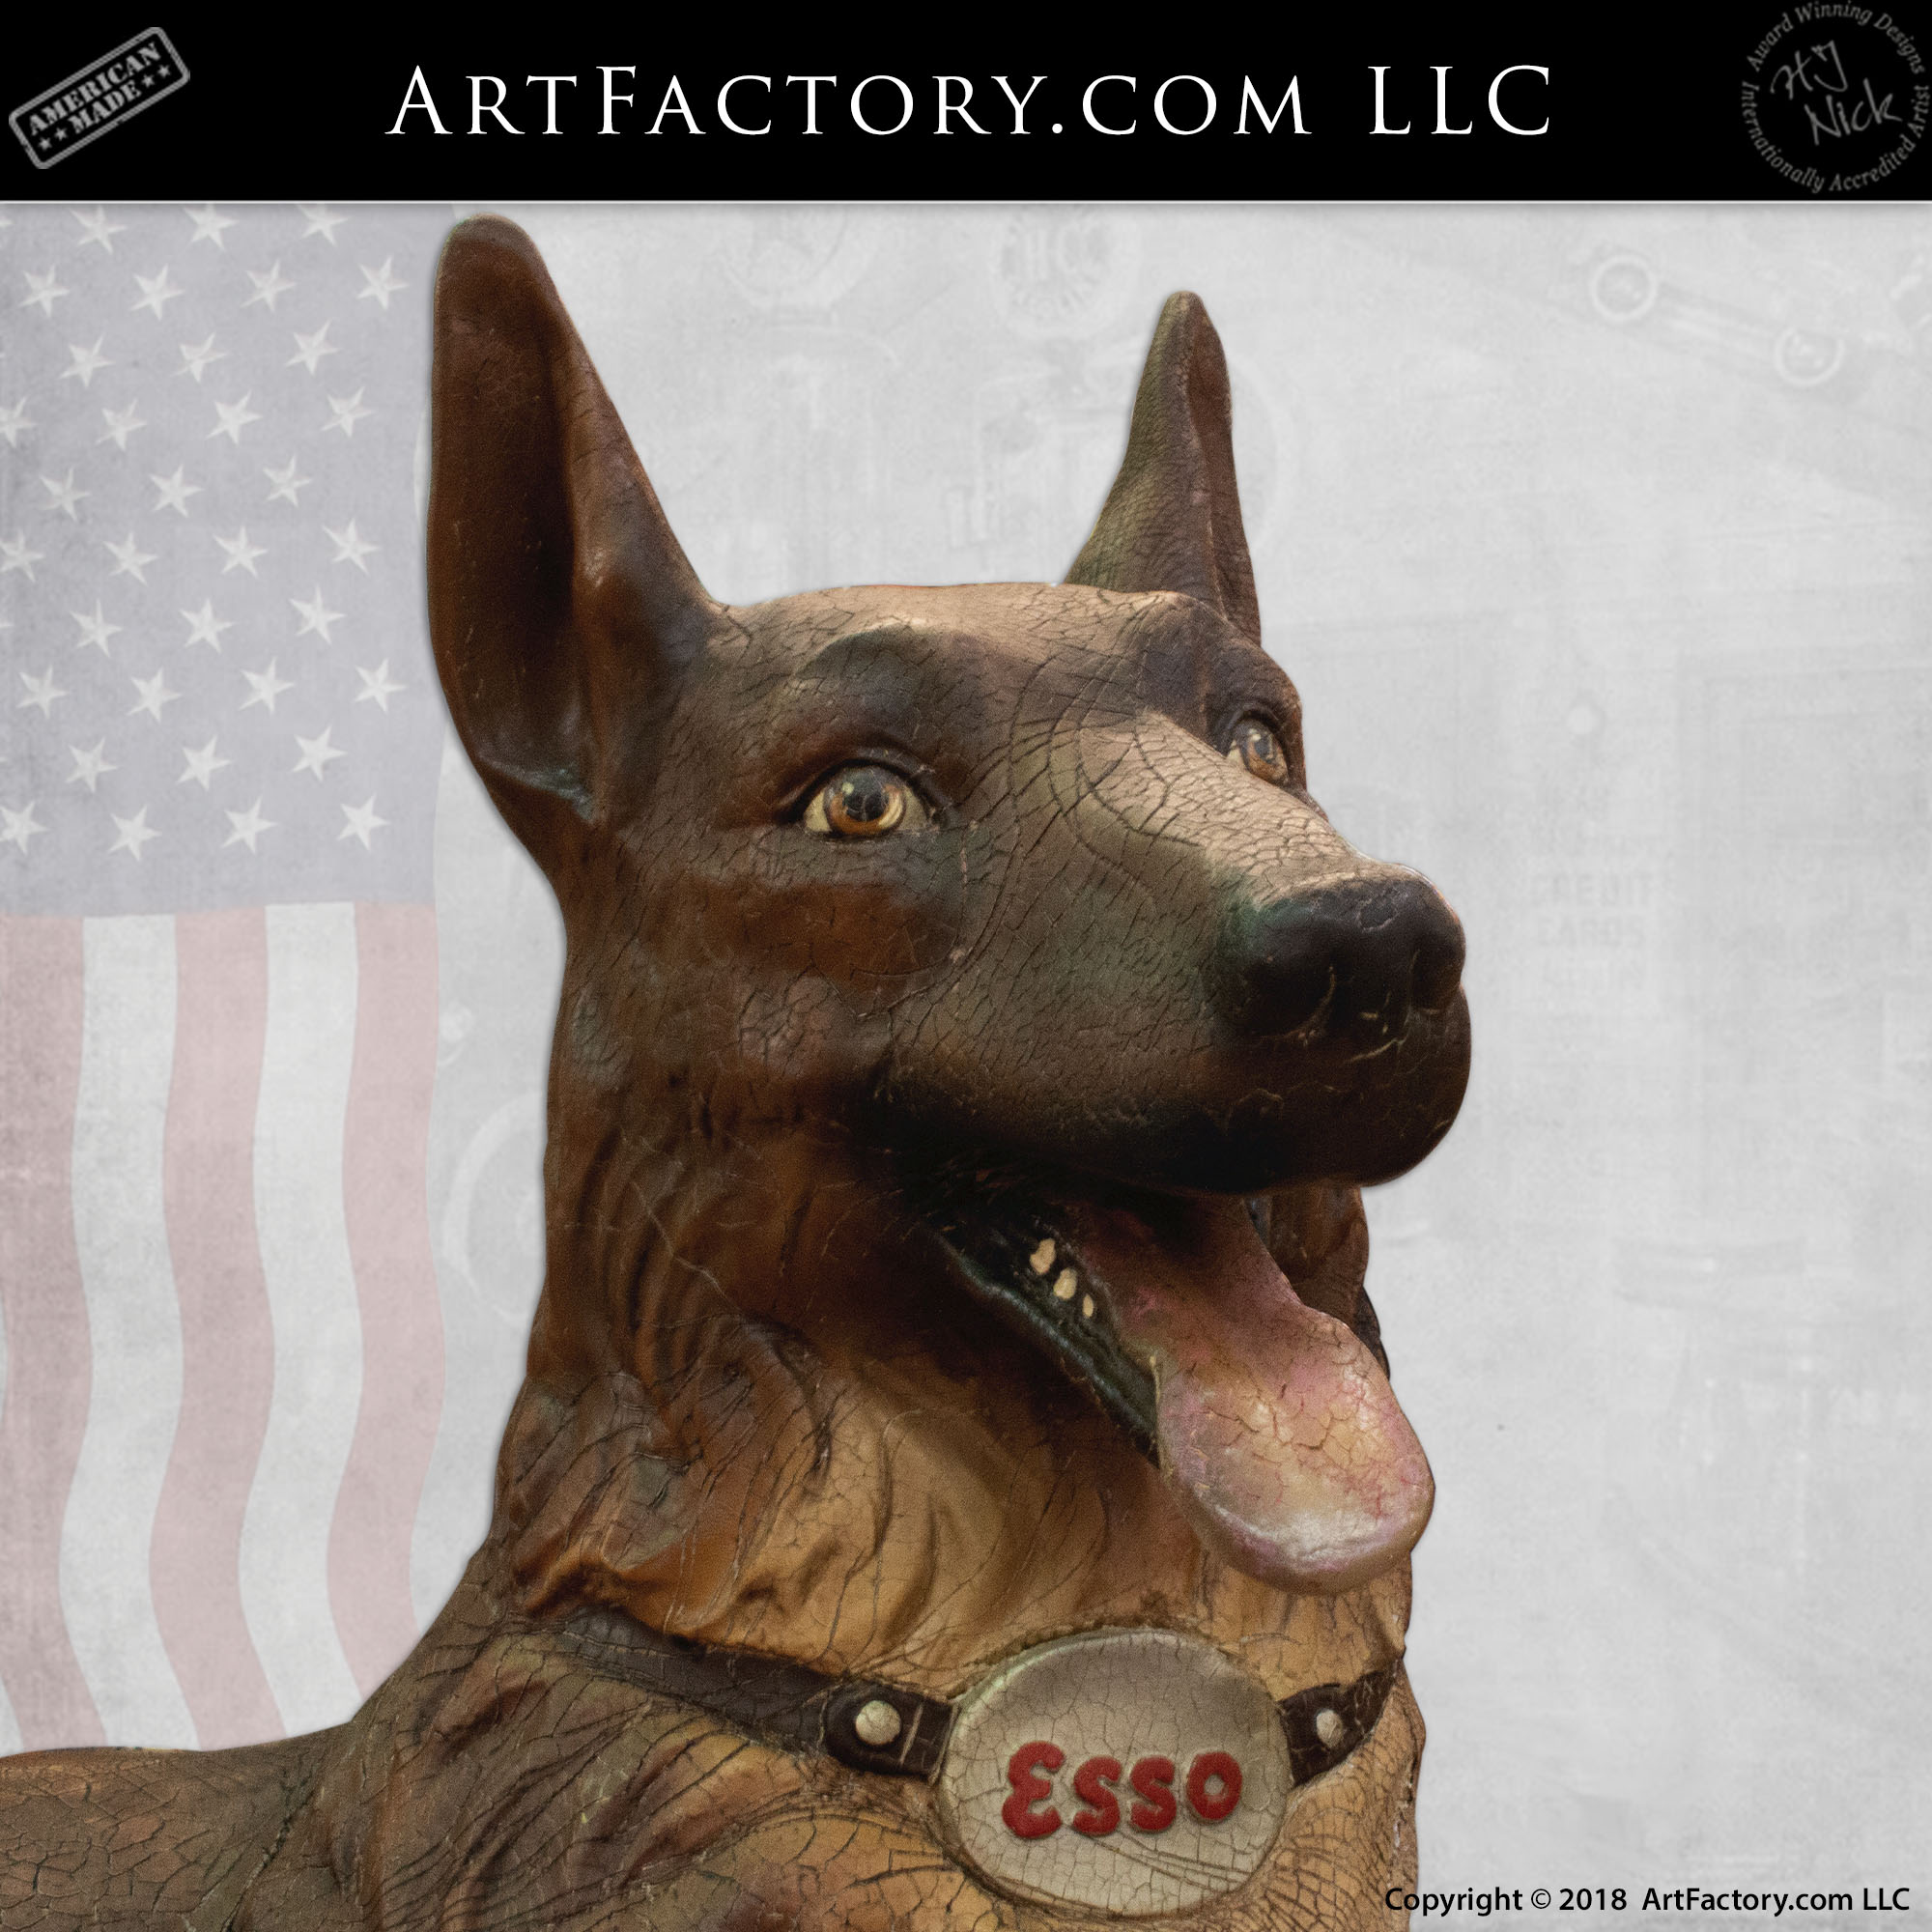 Carved Wood Esso Dog Full Sized